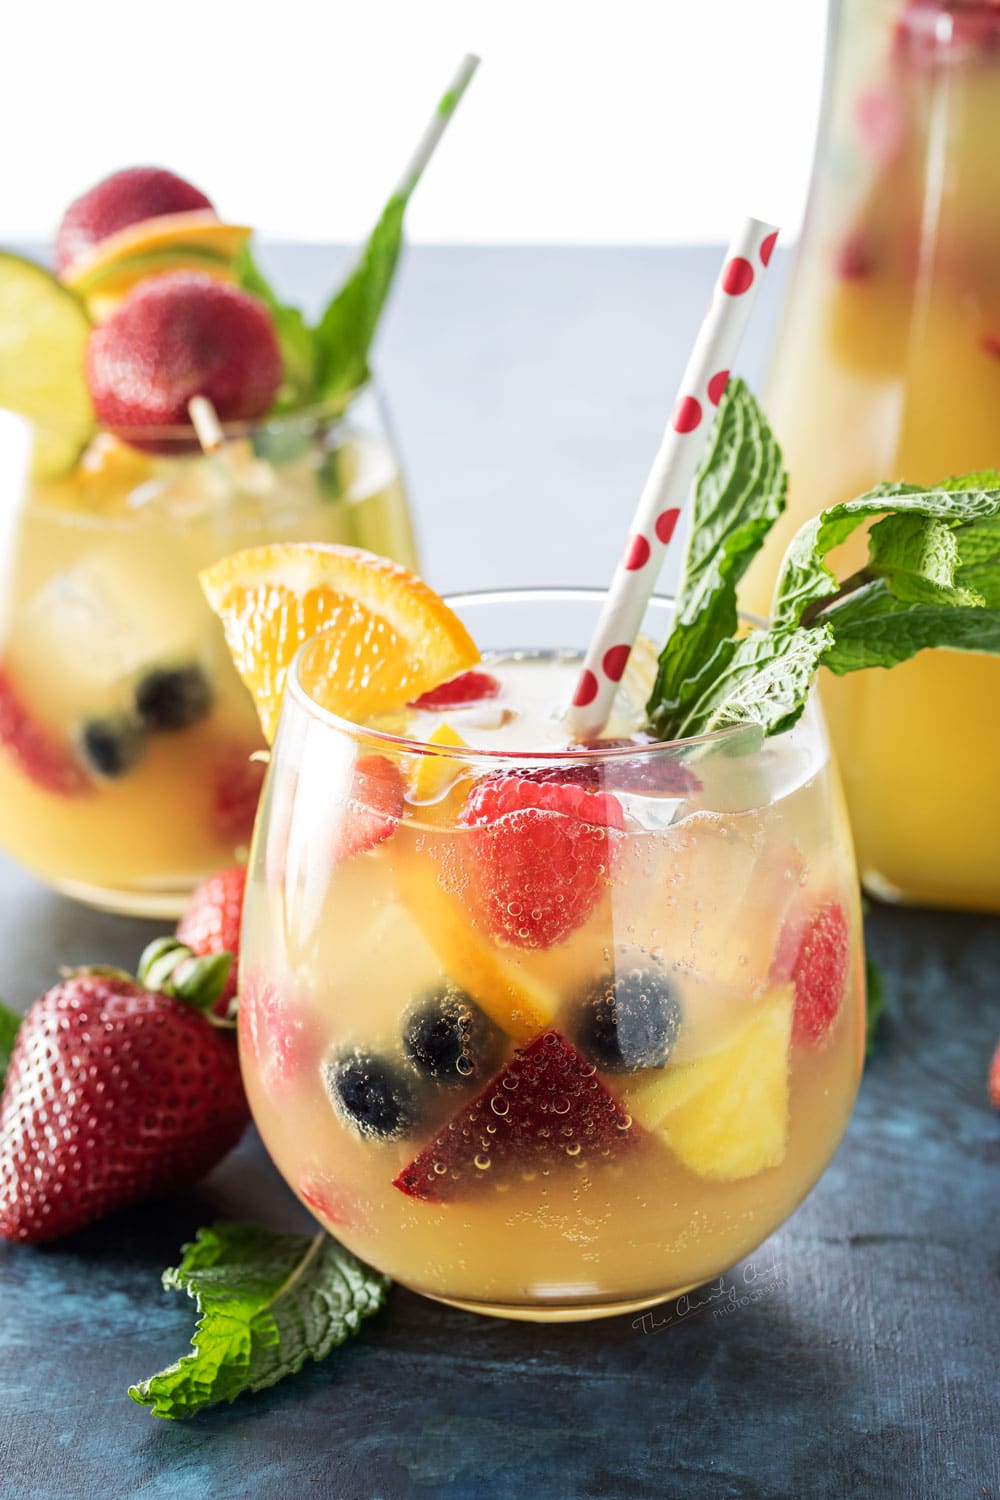 Summer Pineapple Punch | This sweet and easy to make pineapple punch will be the hit of any party! Just 4 simple ingredients plus fresh fruit and pretty garnishes! | http://thechunkychef.com